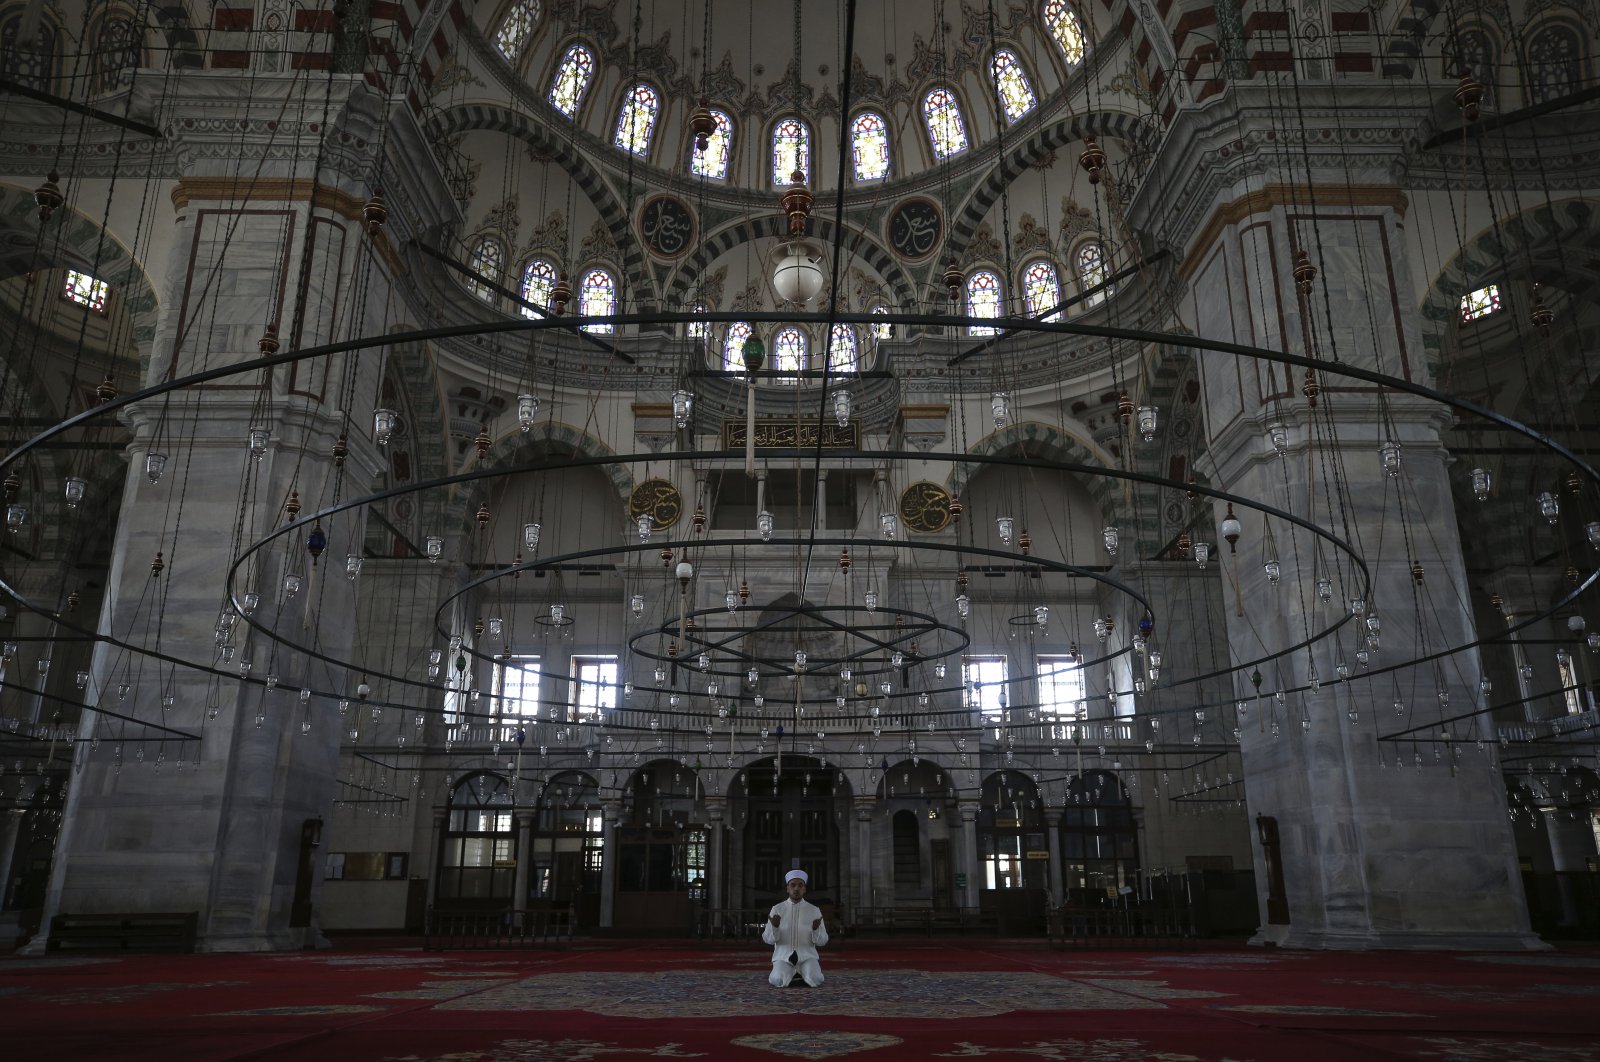 Esat Şahin, imam of the iconic Fatih Mosque, holds prayers on the first day of Ramadan without the public due to the coronavirus restrictions in Istanbul, Turkey, April 24, 2020. (AP Photo)